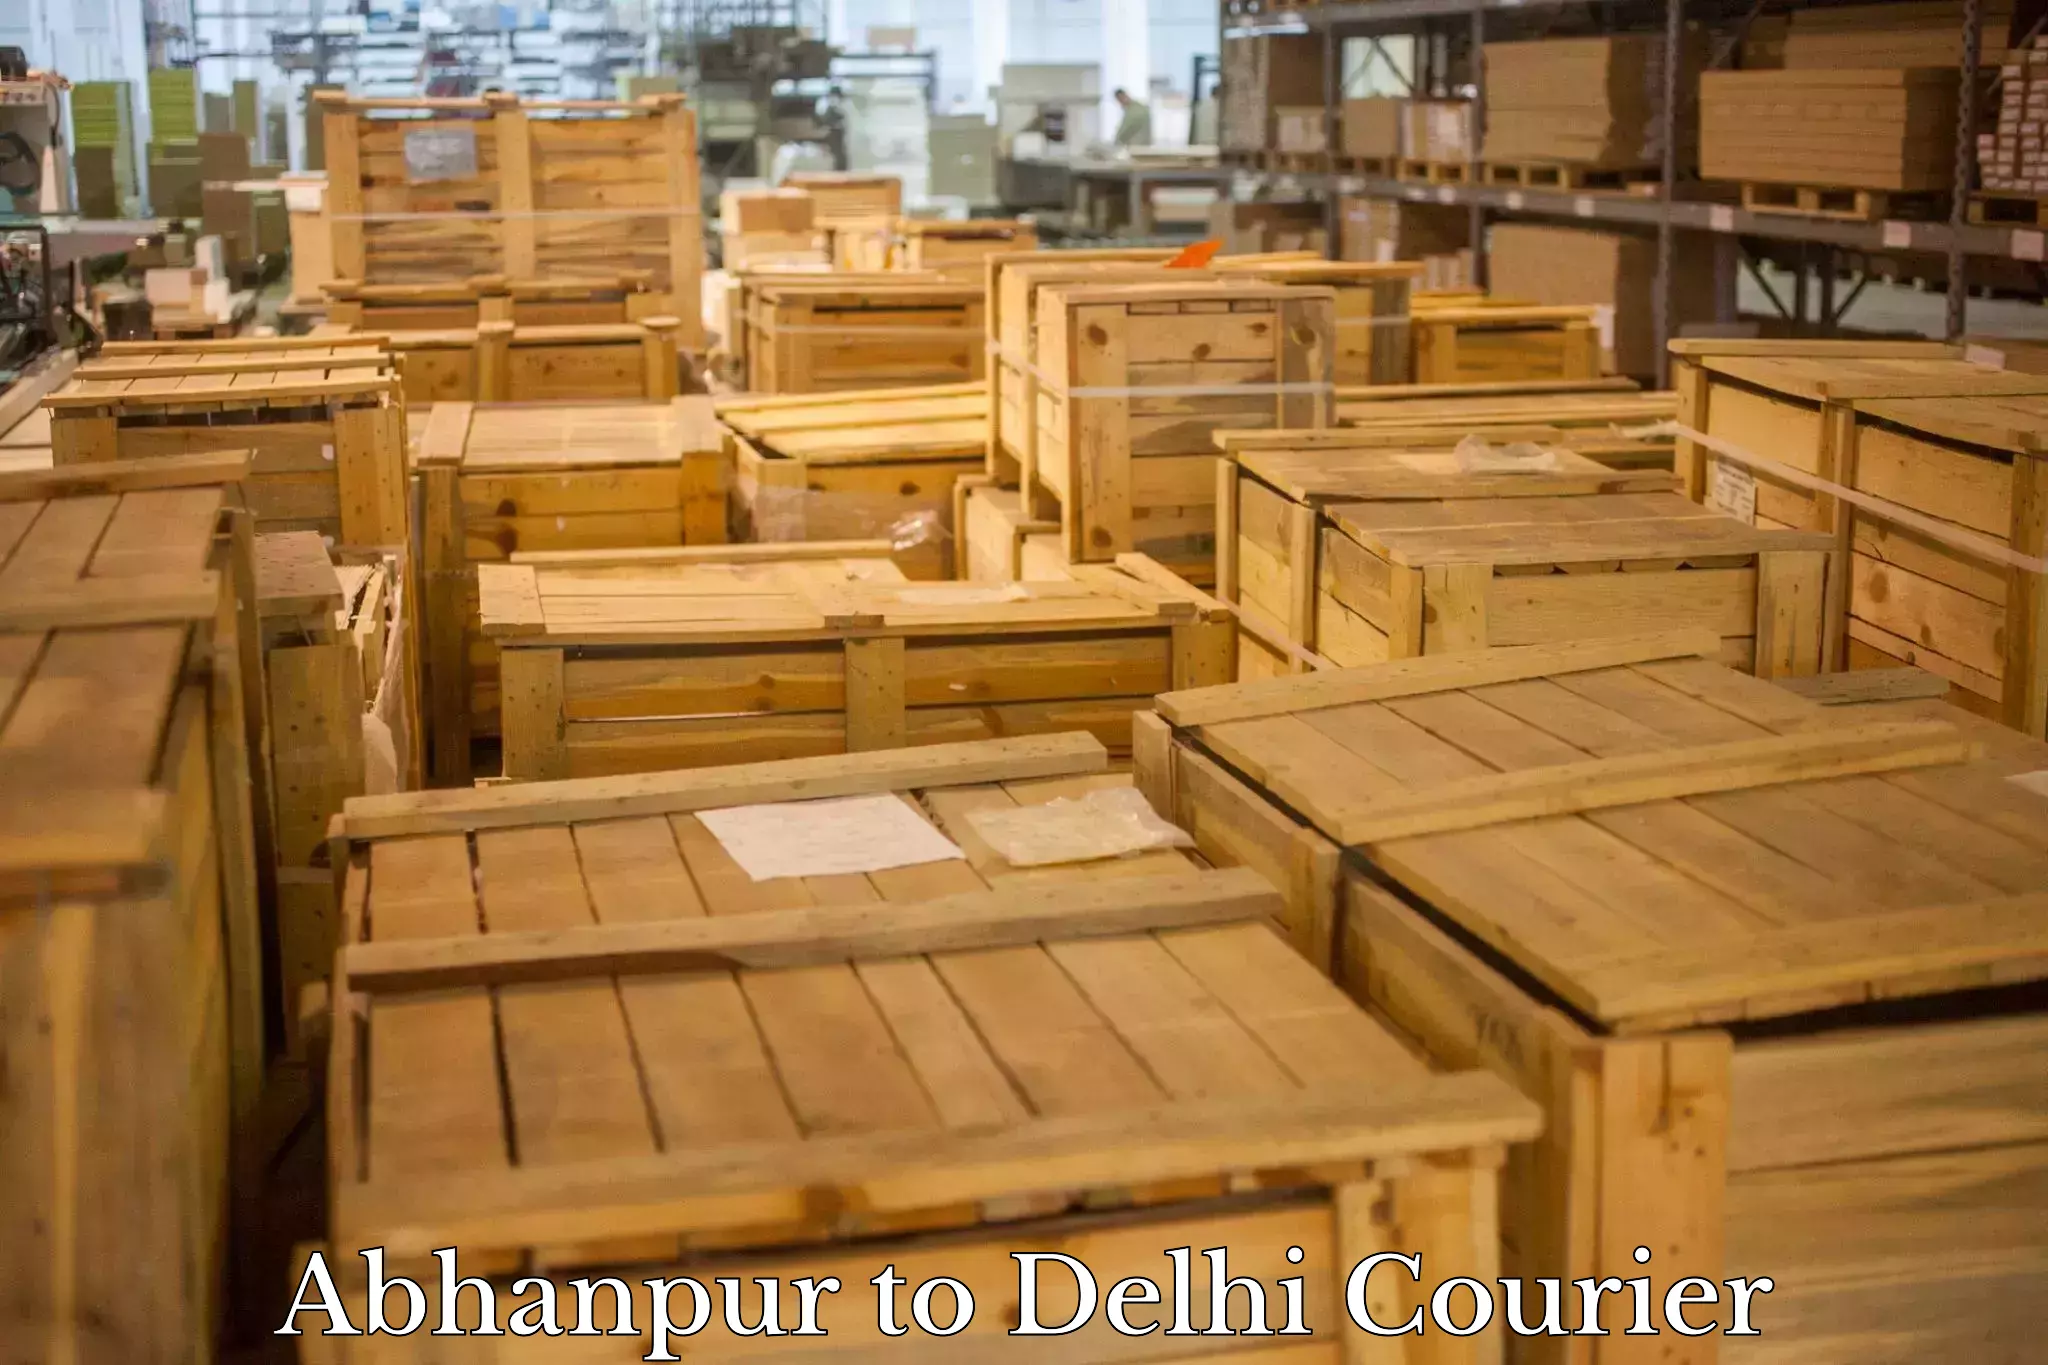 Parcel service for businesses Abhanpur to Delhi